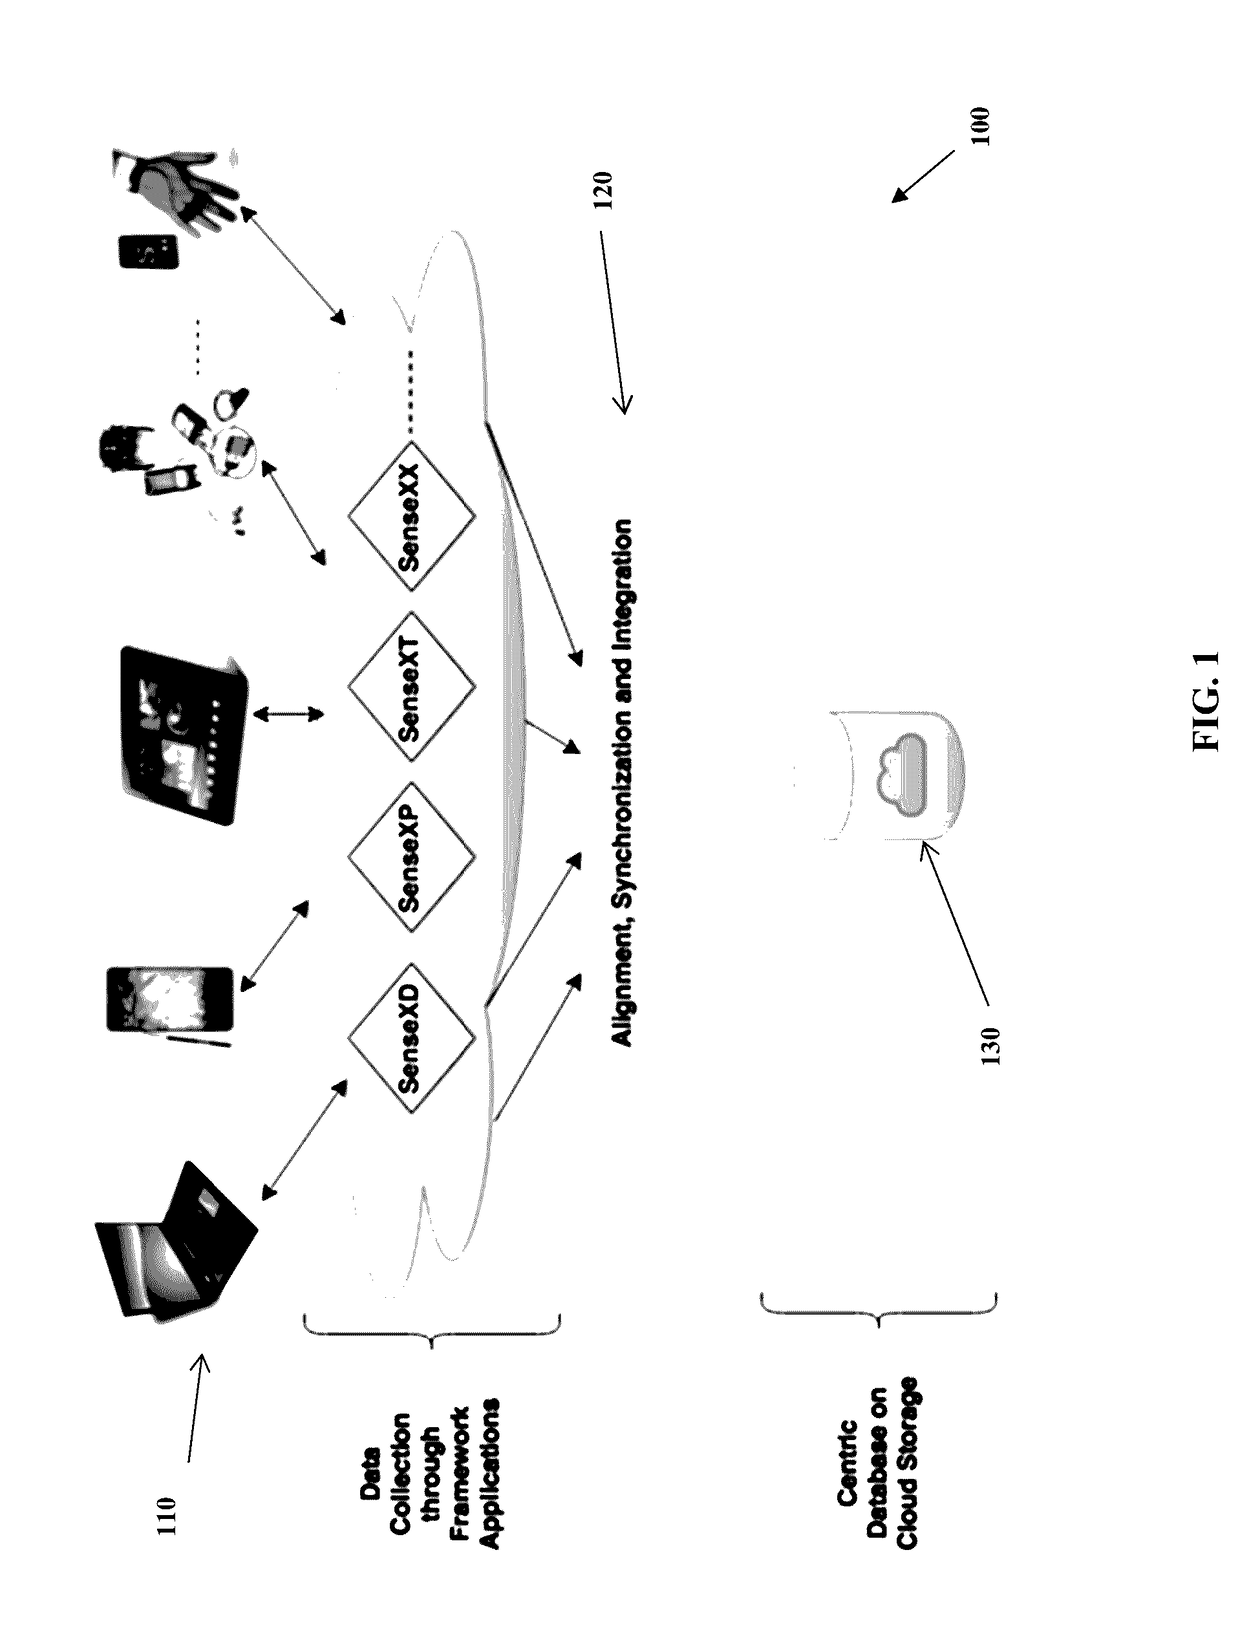 System and method for multi-device continuum and seamless sensing platform for context aware analytics